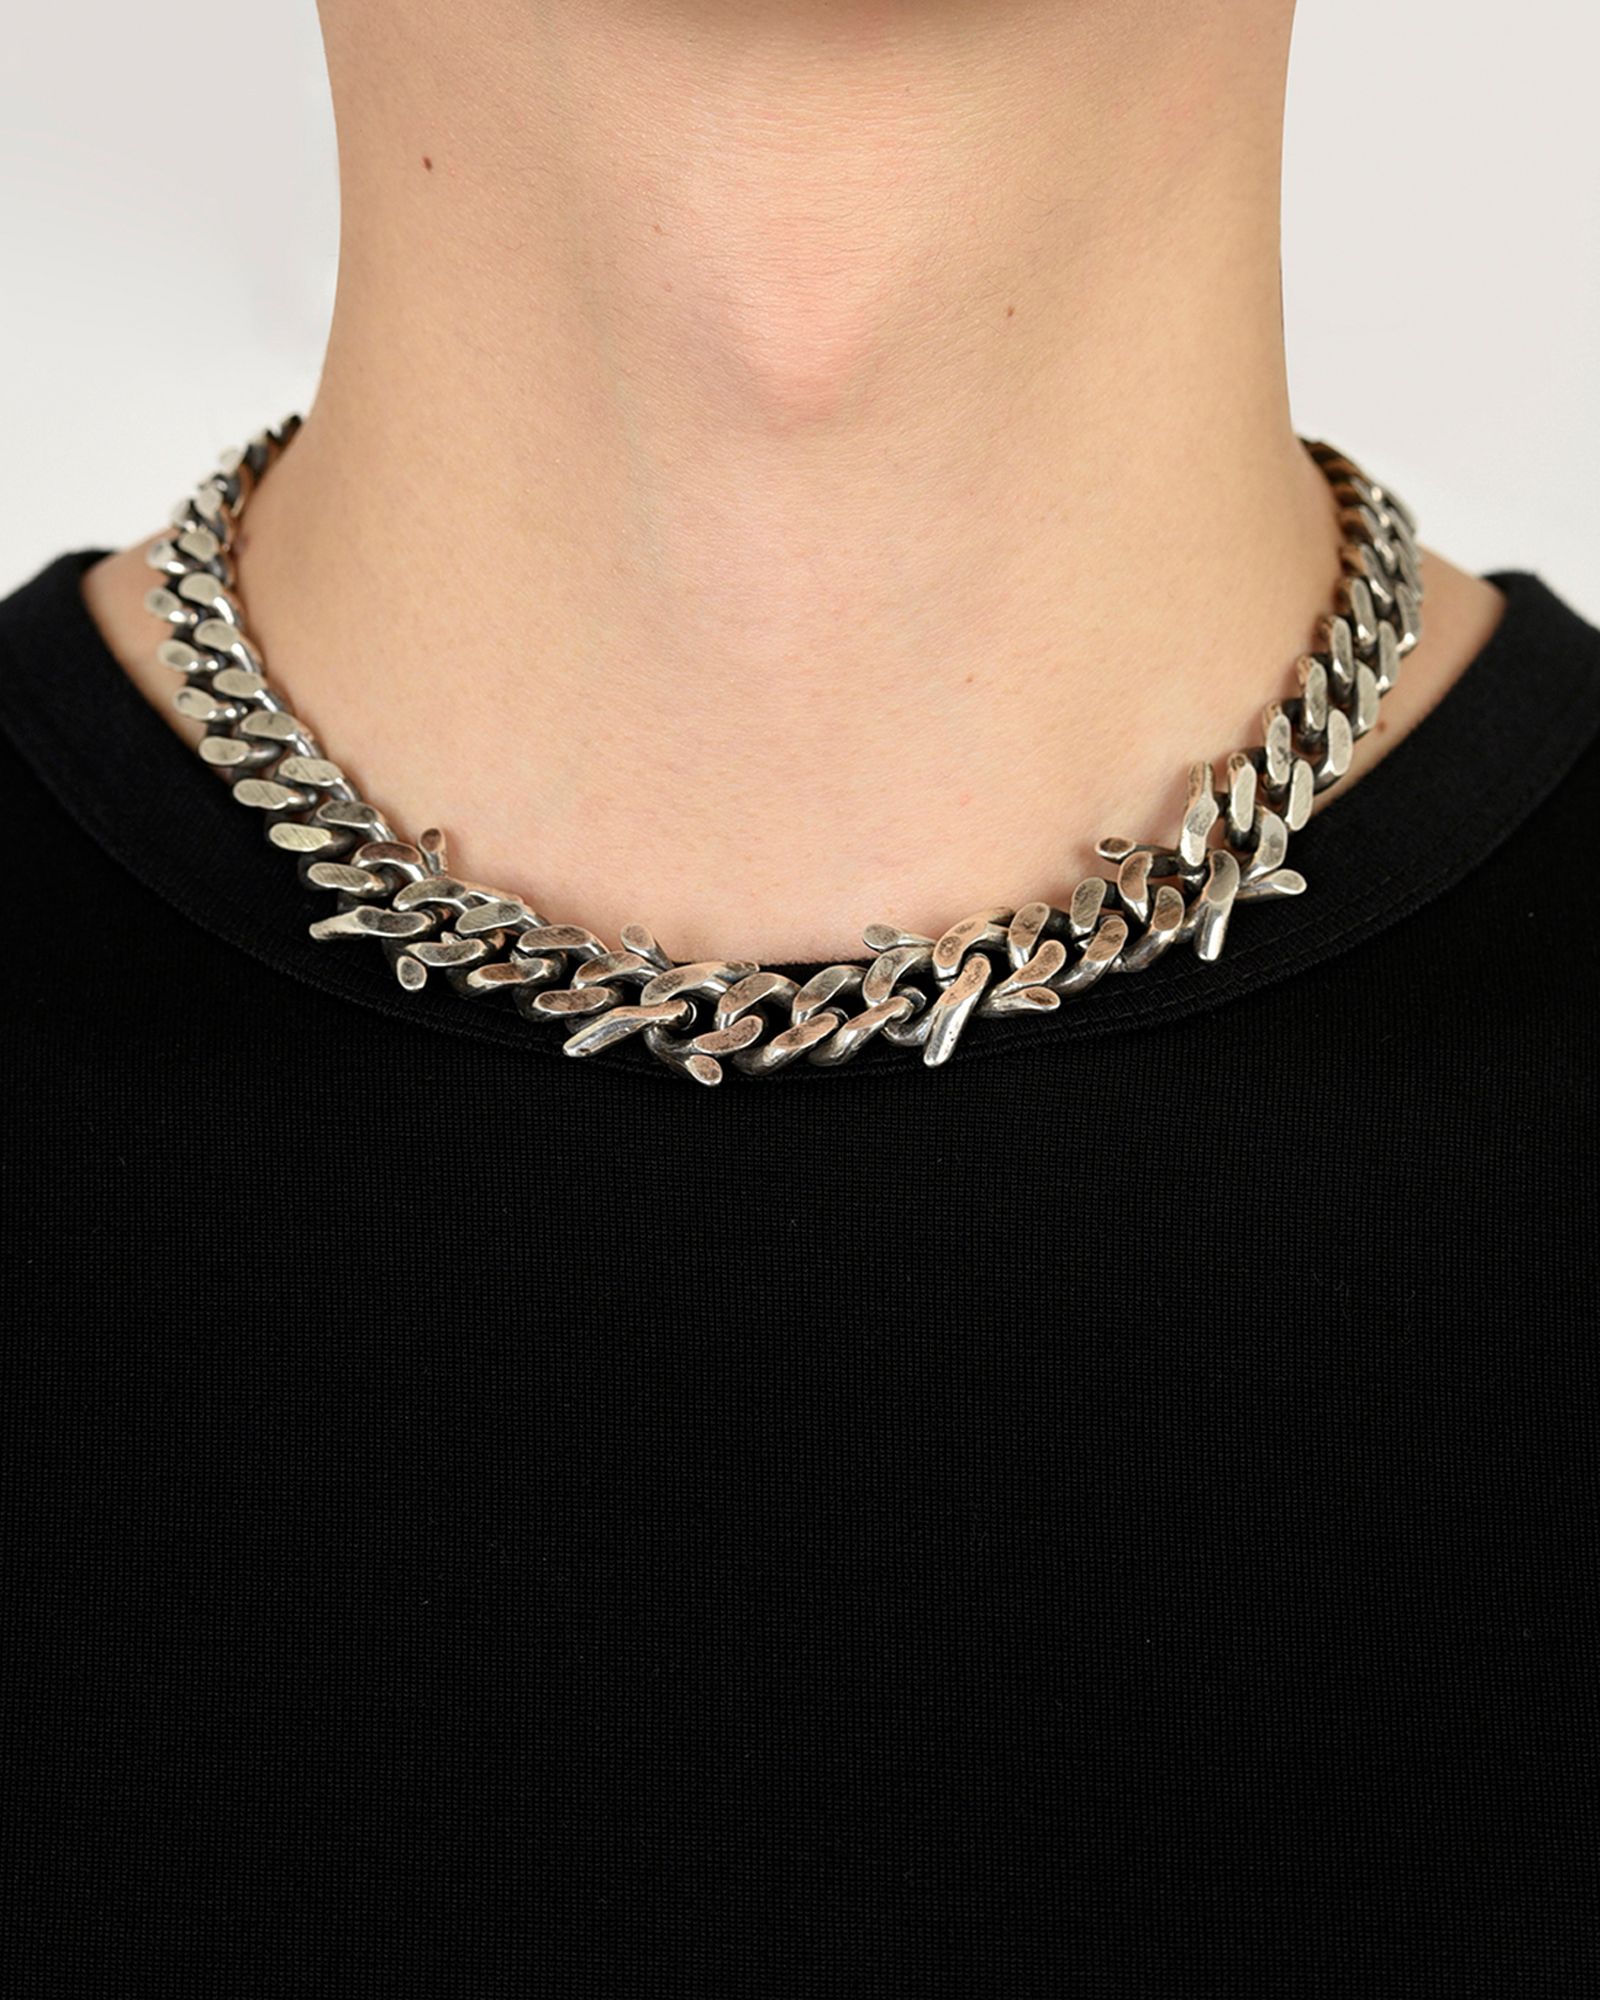 LAD MUSICIAN BARBED WIRE NECKLACE